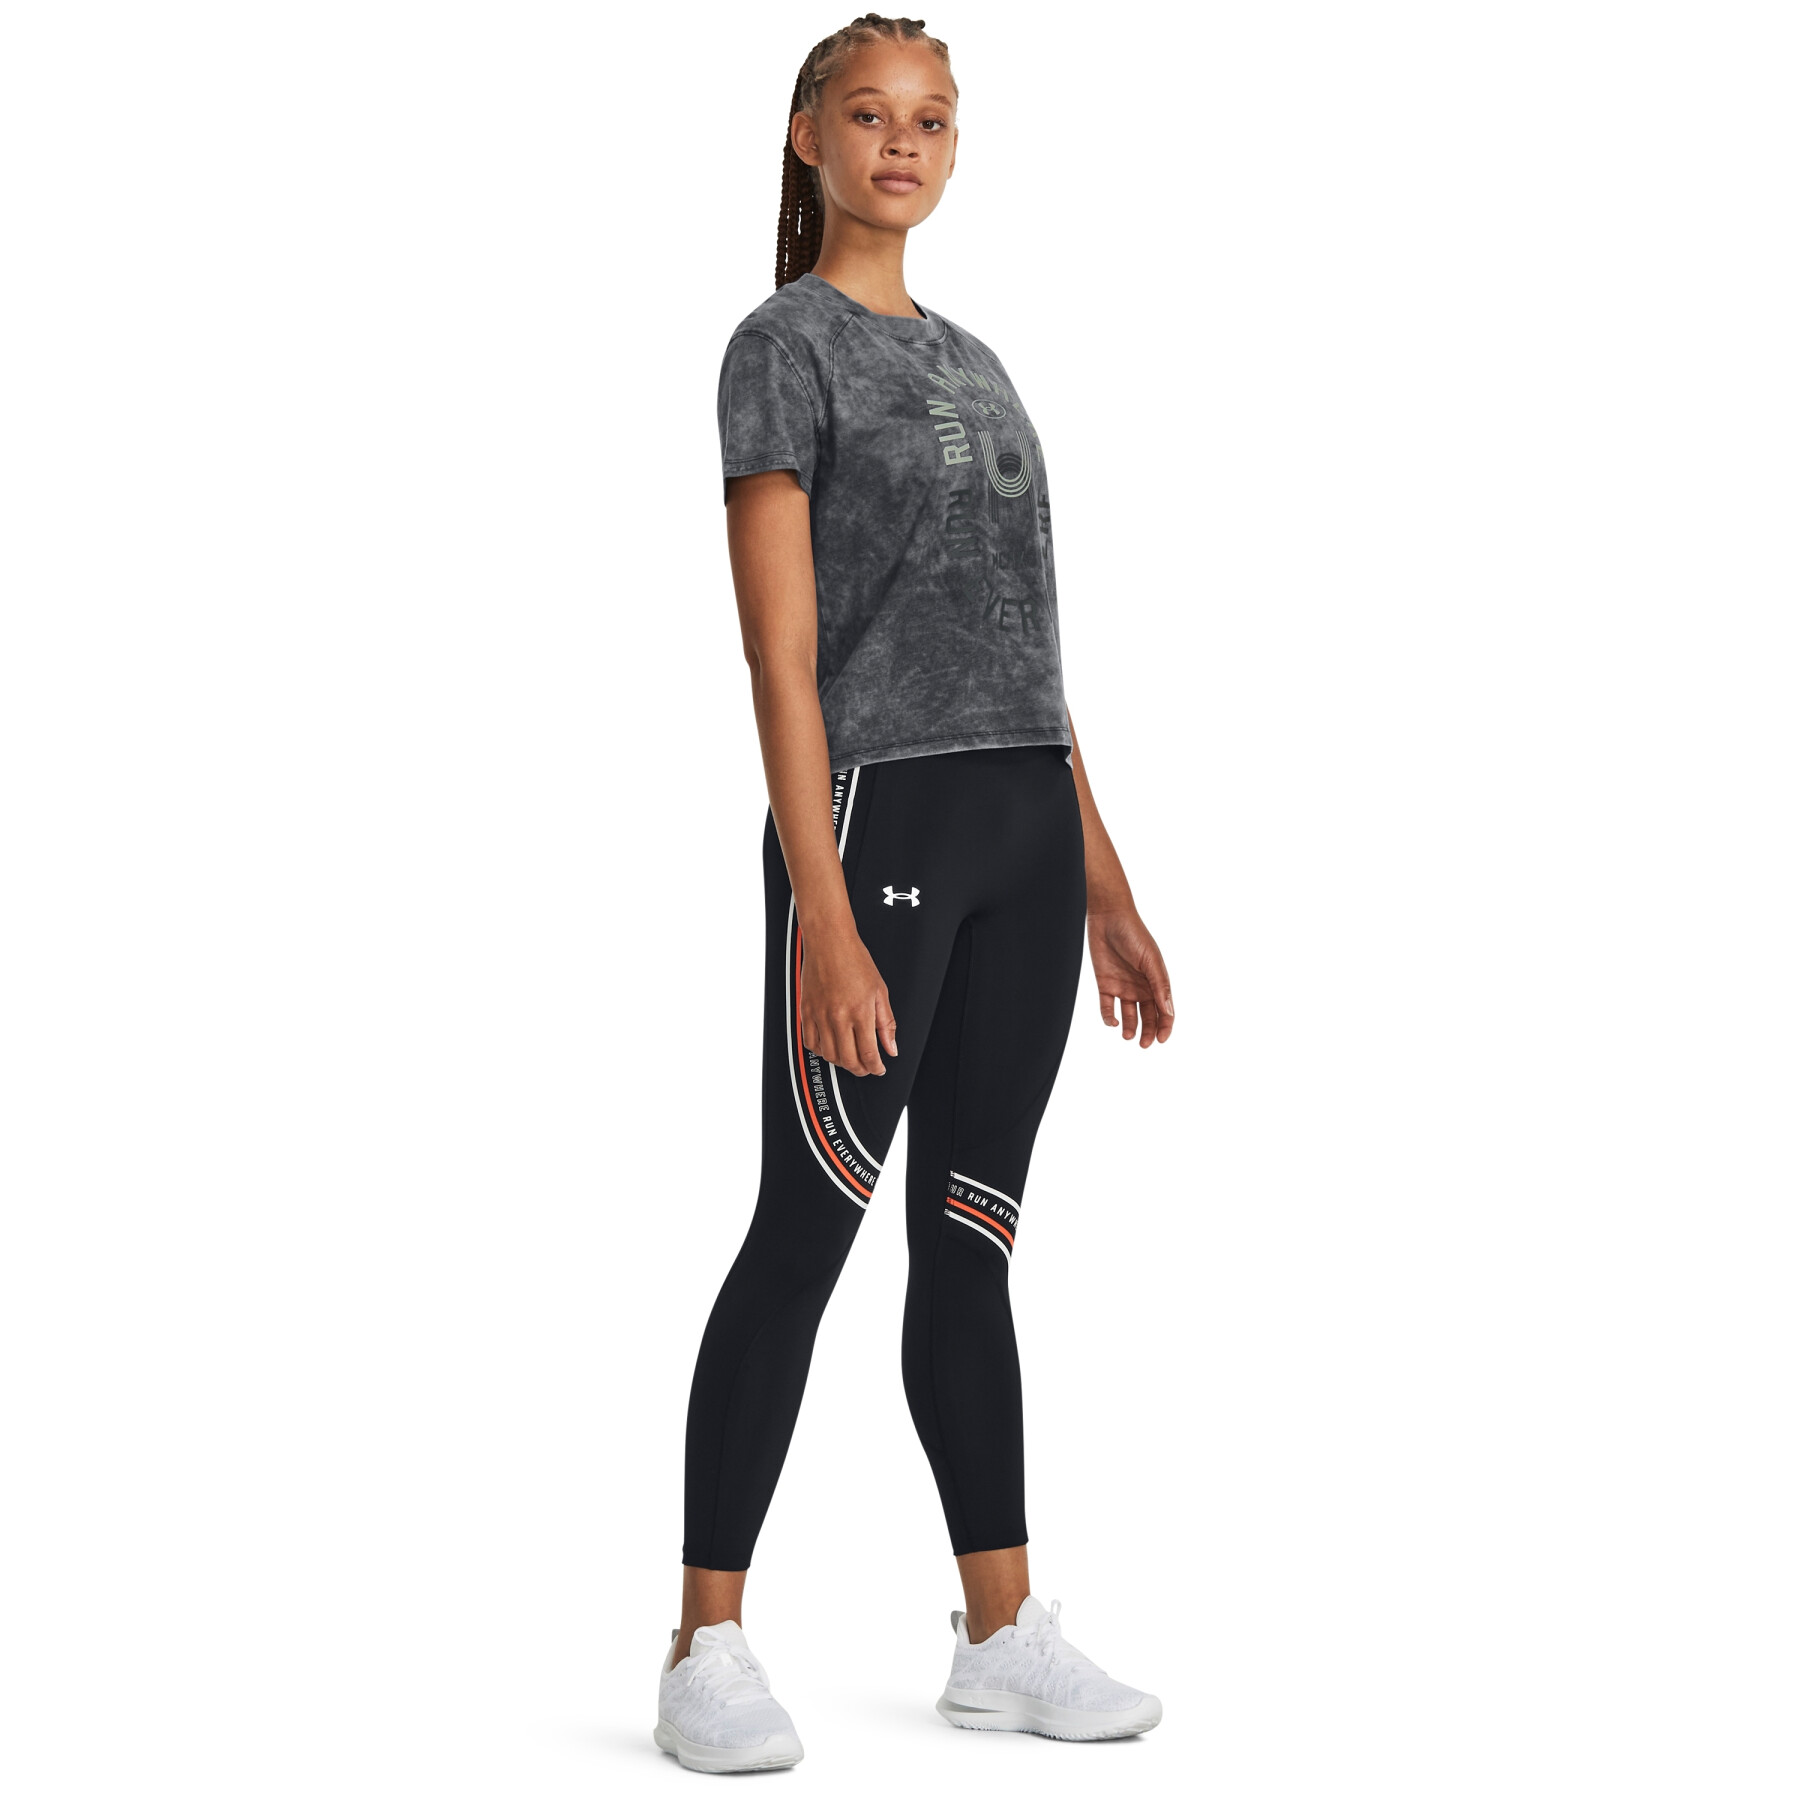 Women's T-shirt Under Armour Everywhere Graphic